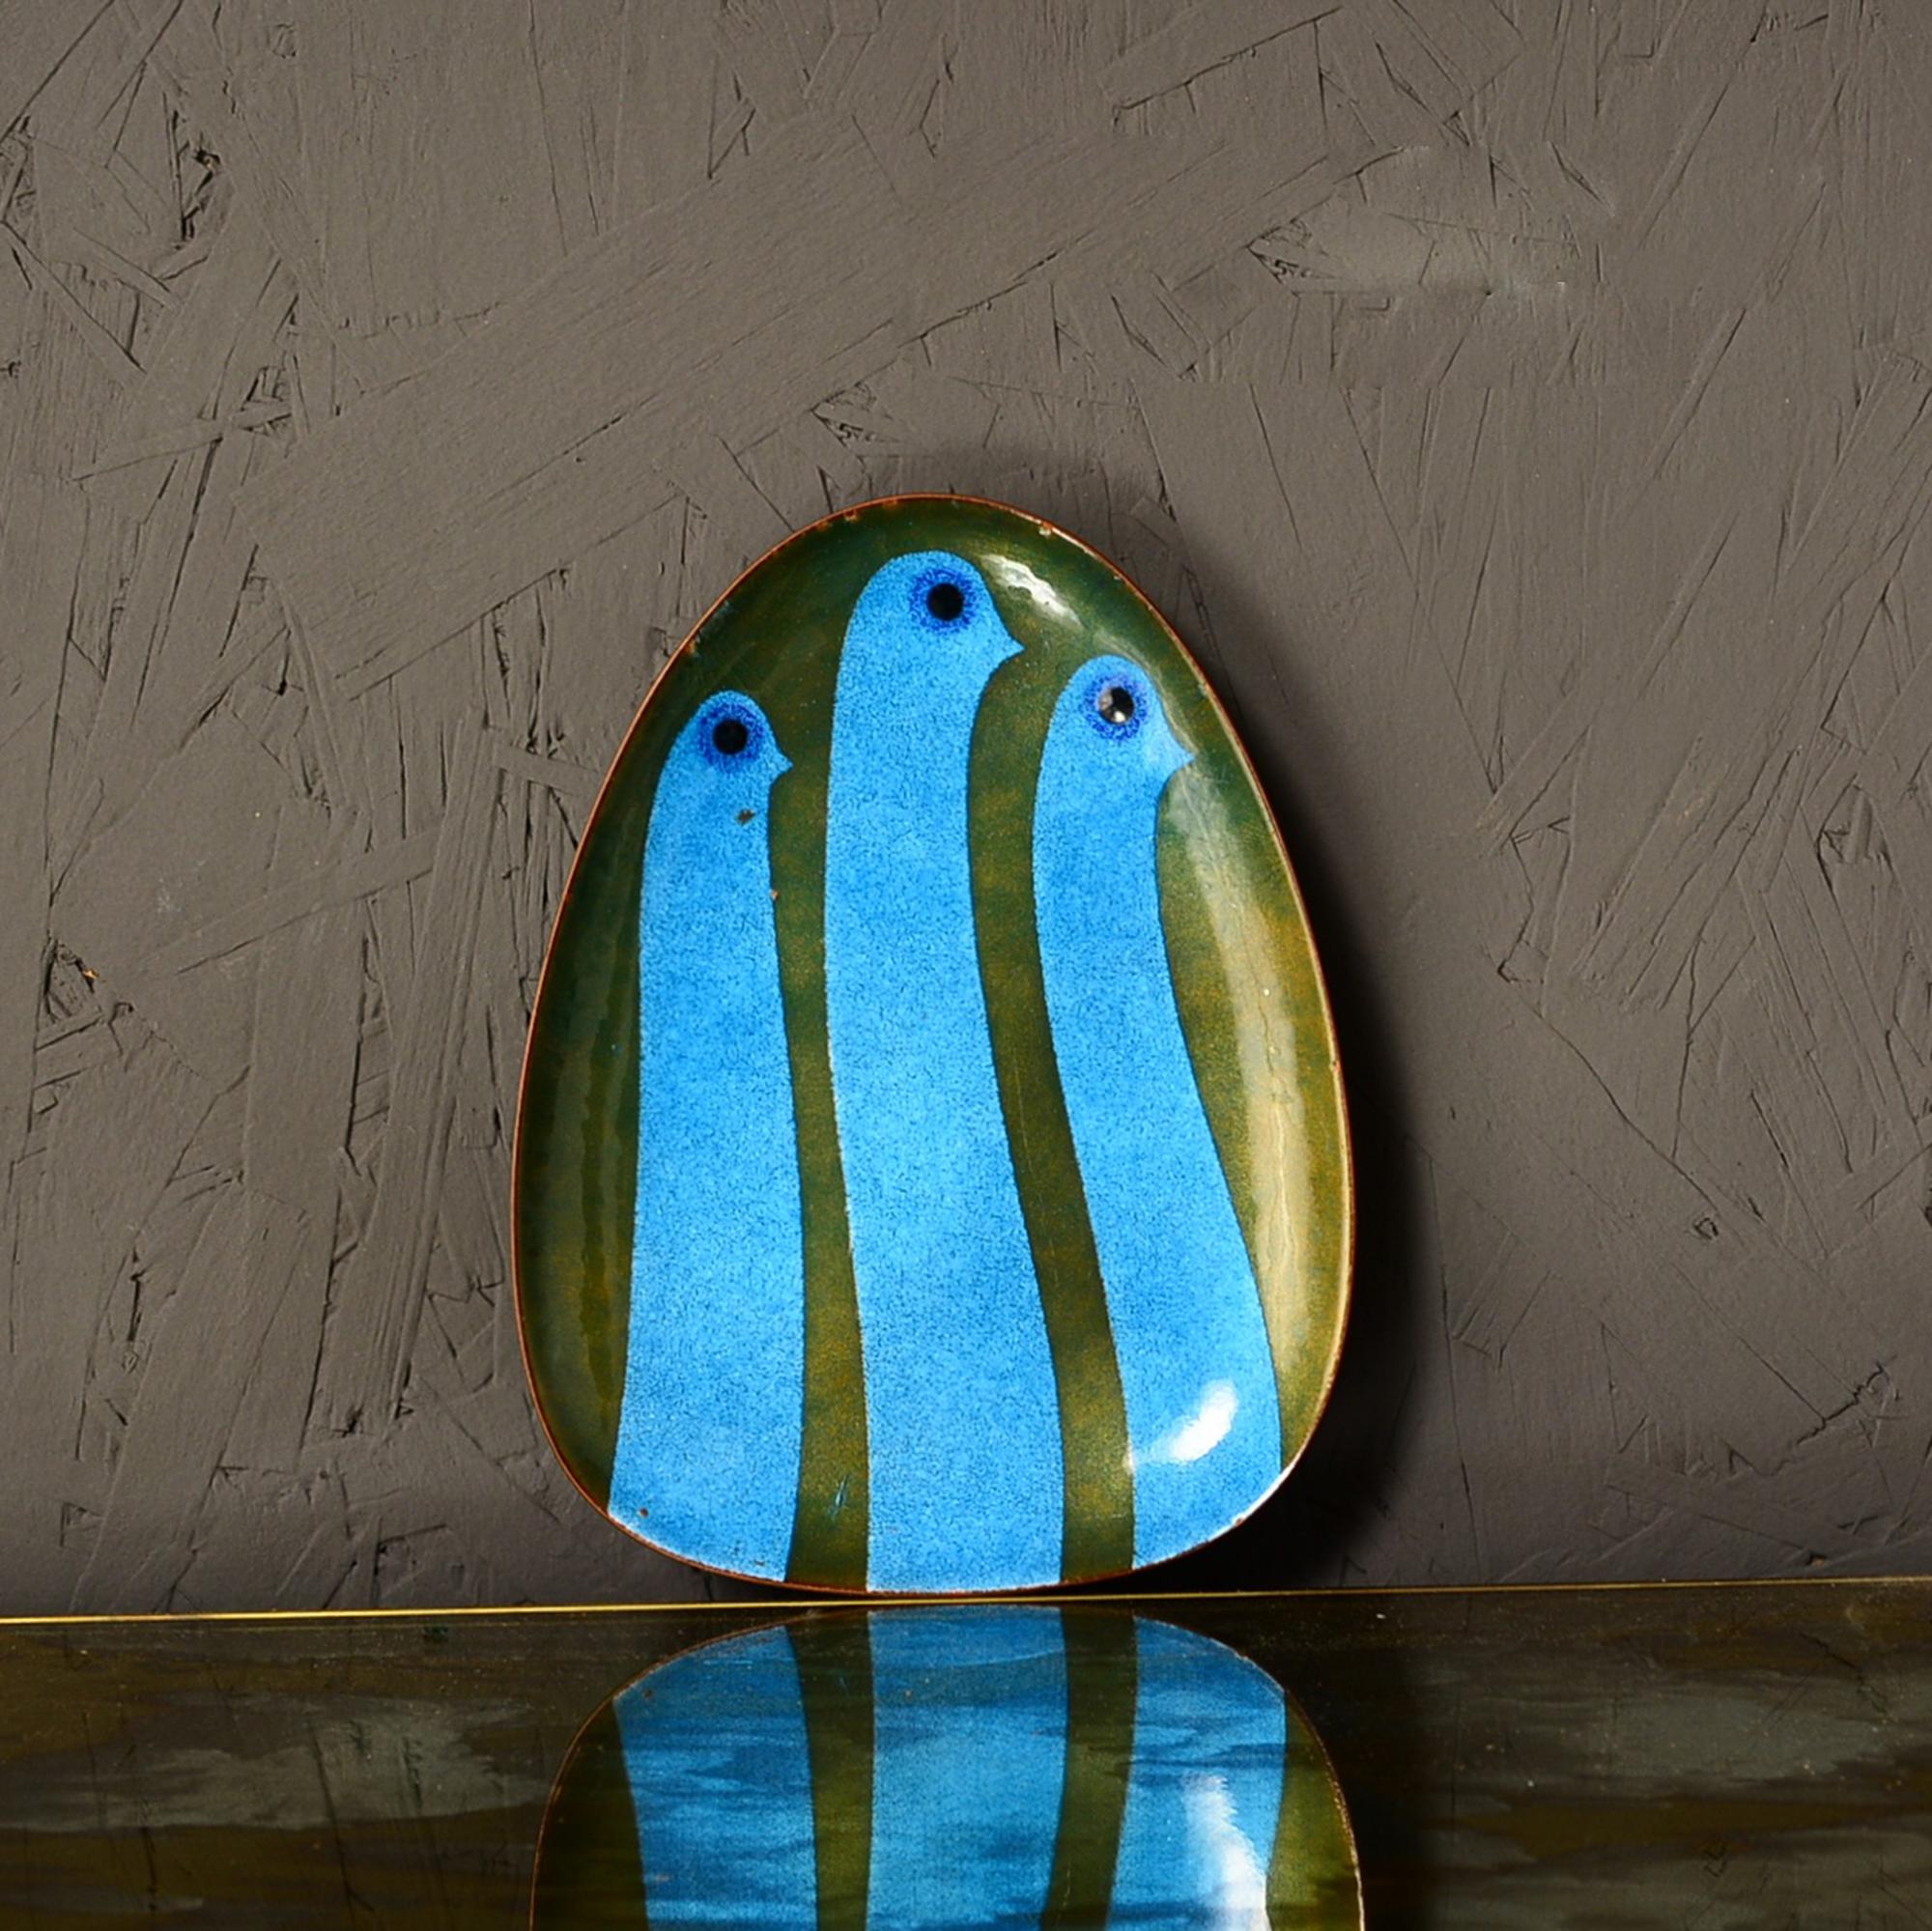 Famed enamel artist Miguel Pineda Mid-Century Modernism dish plate in copper enamel with a luscious turquoise bird design of abstract expressionism, circa 1970s.
Vibrant eye-catching modernist design. Exquisite colors.
Stamped with maker’s